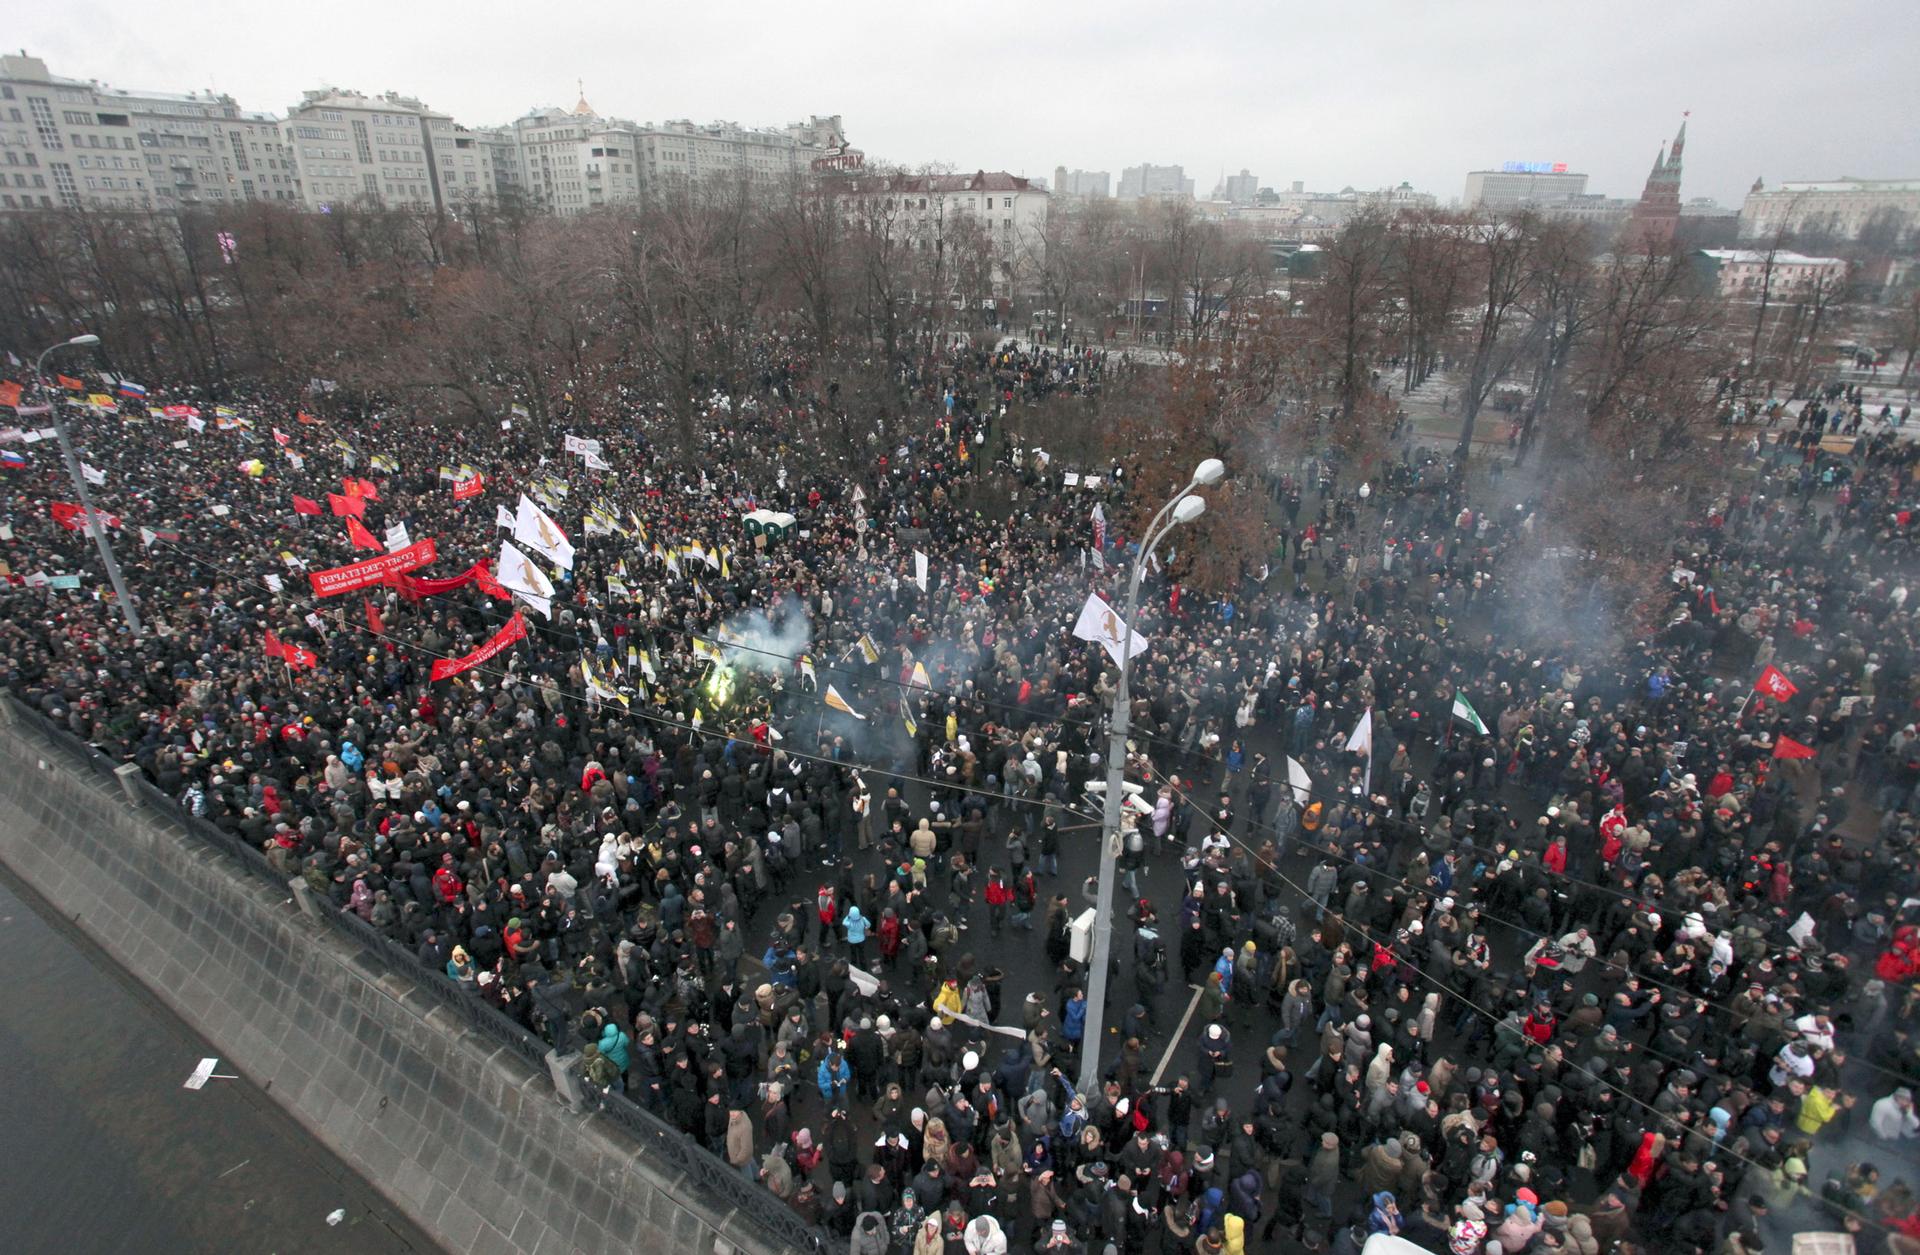 An aerial view of thousands of people gathered for a protest